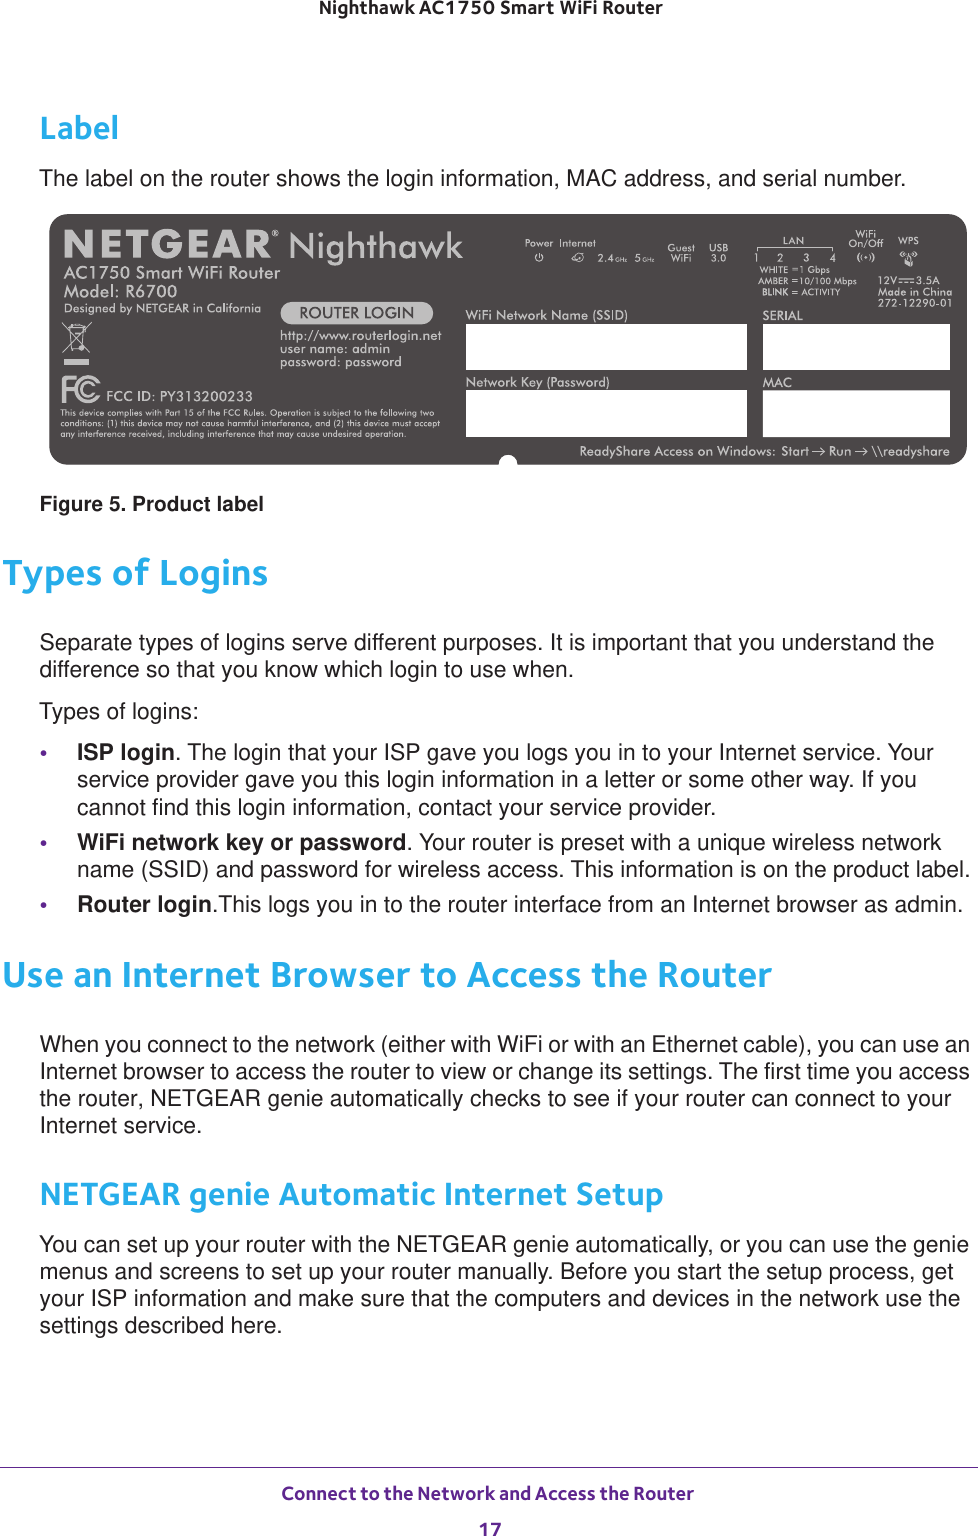 Connect to the Network and Access the Router 17 Nighthawk AC1750 Smart WiFi RouterLabelThe label on the router shows the login information, MAC address, and serial number.Figure 5. Product labelTypes of LoginsSeparate types of logins serve different purposes. It is important that you understand the difference so that you know which login to use when. Types of logins:•ISP login. The login that your ISP gave you logs you in to your Internet service. Your service provider gave you this login information in a letter or some other way. If you cannot find this login information, contact your service provider.•WiFi network key or password. Your router is preset with a unique wireless network name (SSID) and password for wireless access. This information is on the product label.•Router login.This logs you in to the router interface from an Internet browser as admin.Use an Internet Browser to Access the RouterWhen you connect to the network (either with WiFi or with an Ethernet cable), you can use an Internet browser to access the router to view or change its settings. The first time you access the router, NETGEAR genie automatically checks to see if your router can connect to your Internet service.NETGEAR genie Automatic Internet SetupYou can set up your router with the NETGEAR genie automatically, or you can use the genie menus and screens to set up your router manually. Before you start the setup process, get your ISP information and make sure that the computers and devices in the network use the settings described here.